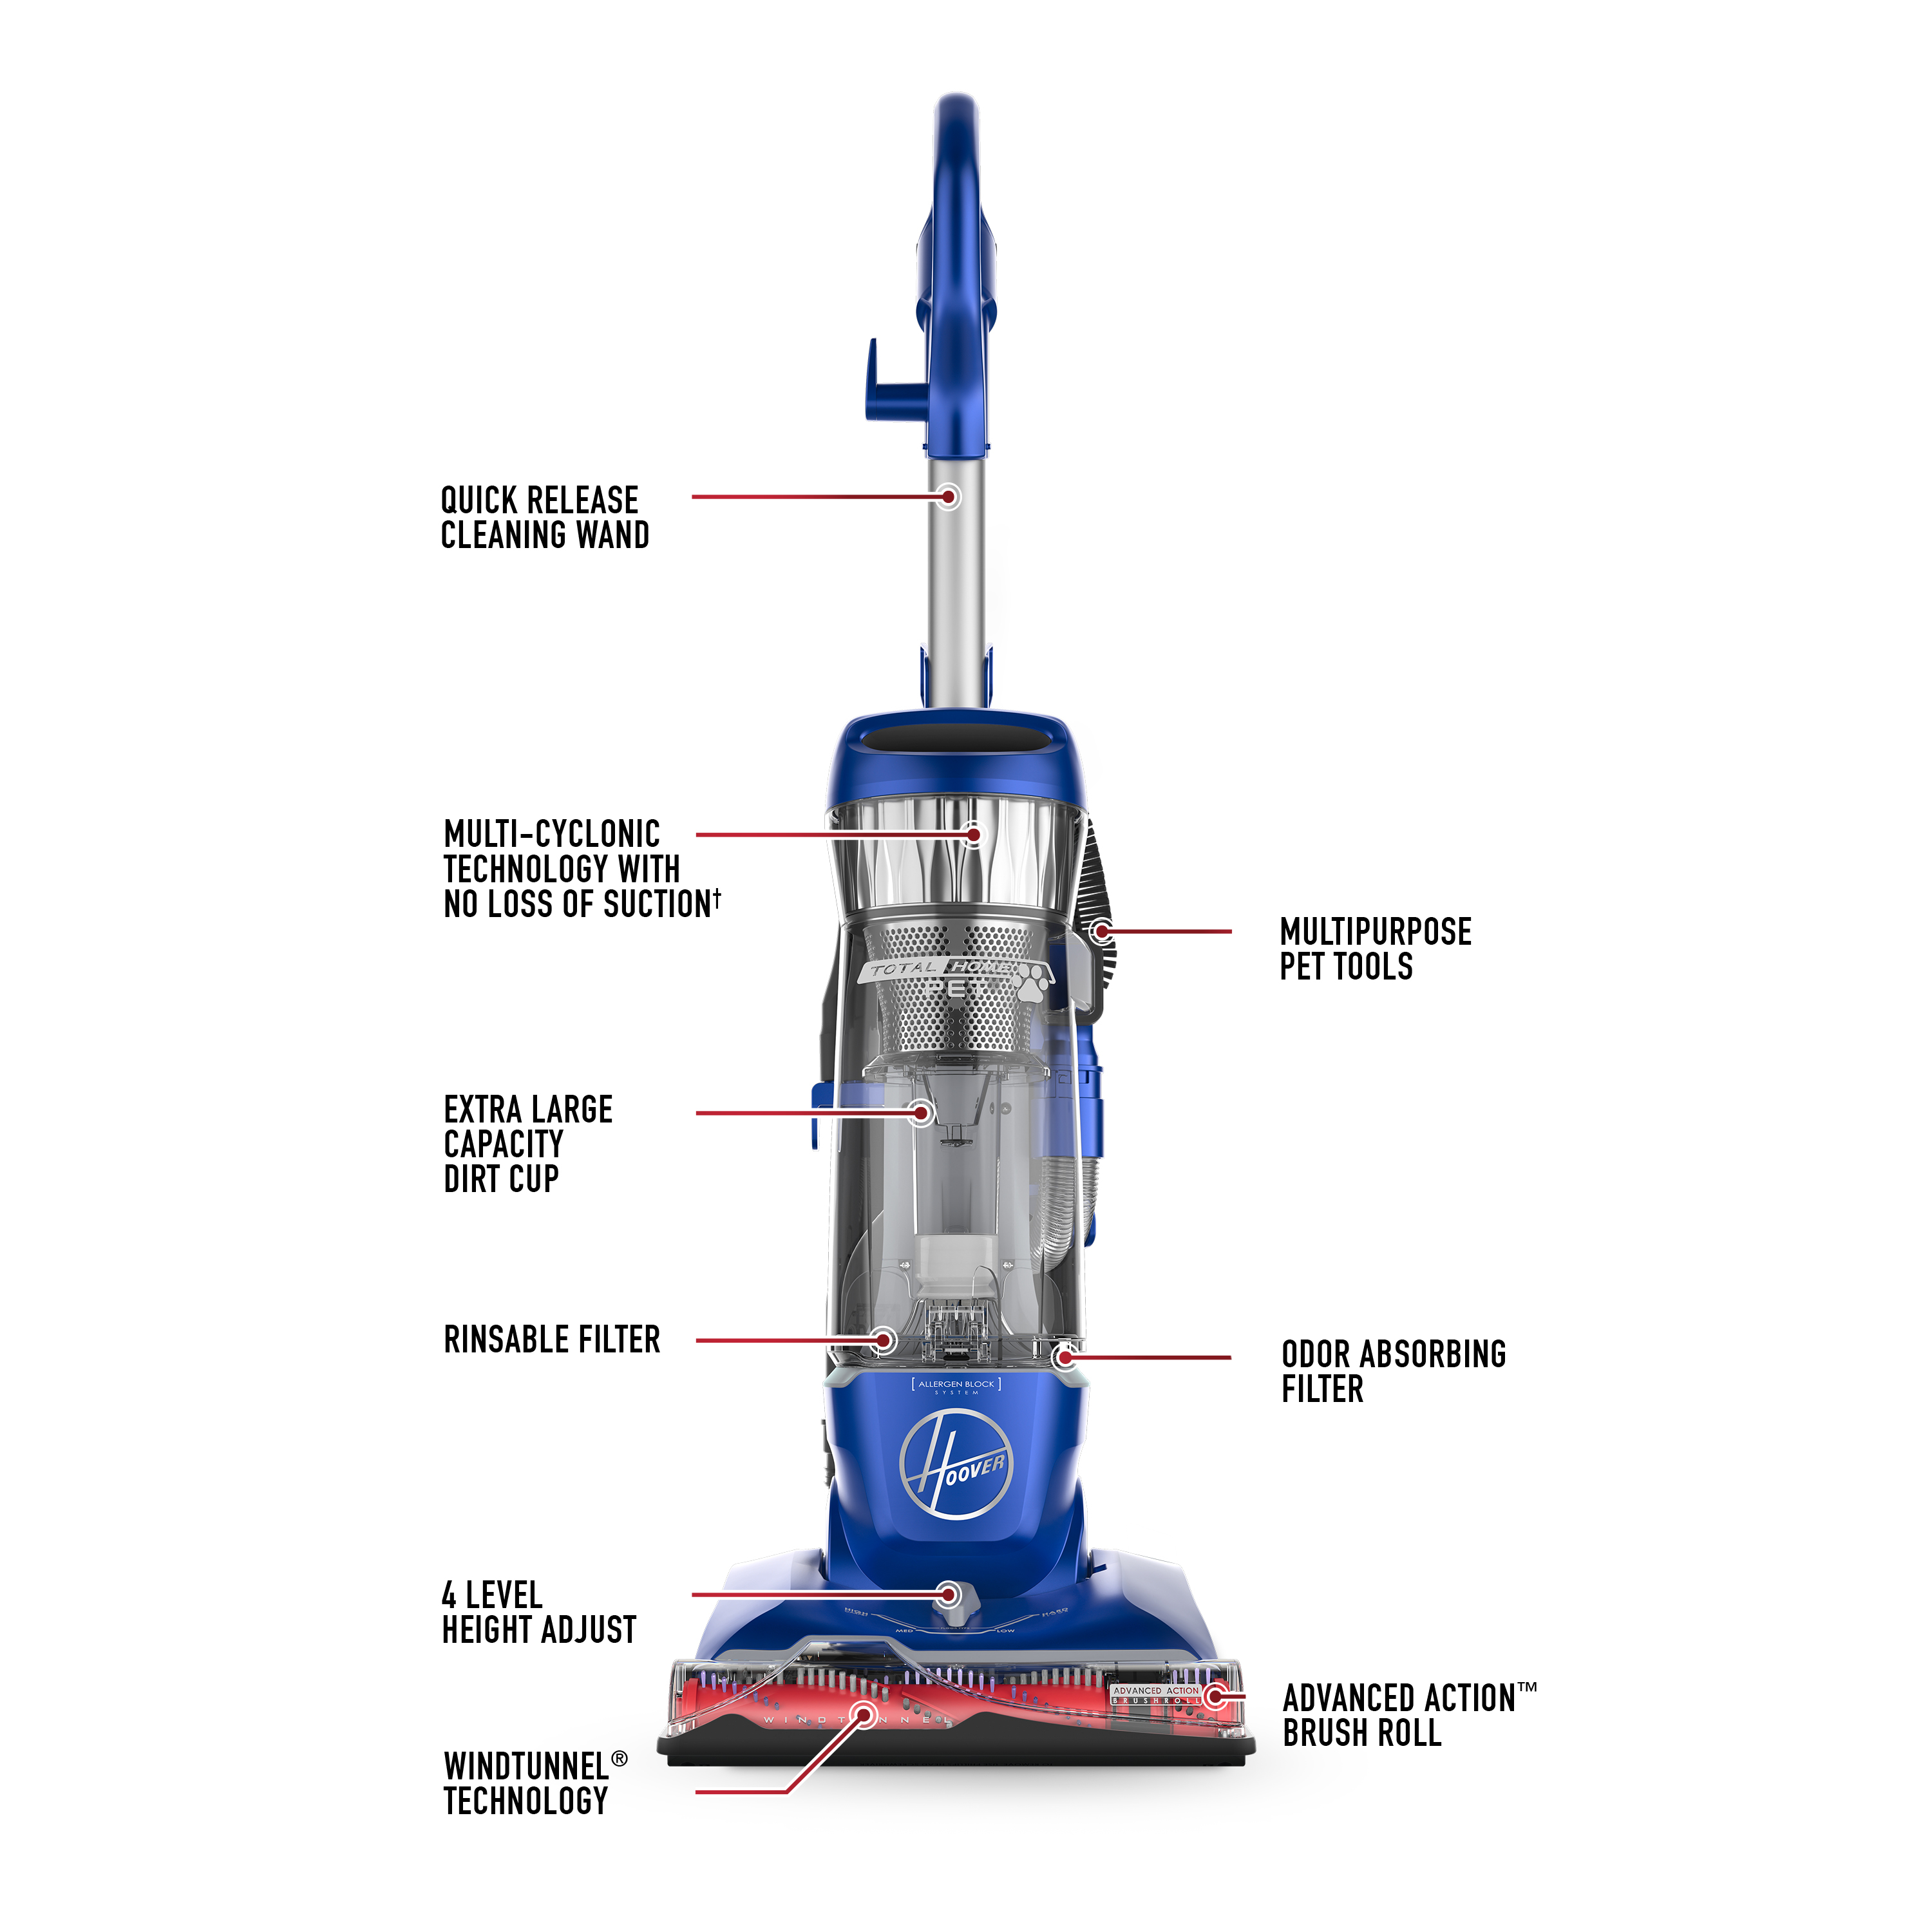 Hoover Total Home Pet Max Life Bagless Upright Vacuum Cleaner, UH74100, New Condition - image 4 of 13